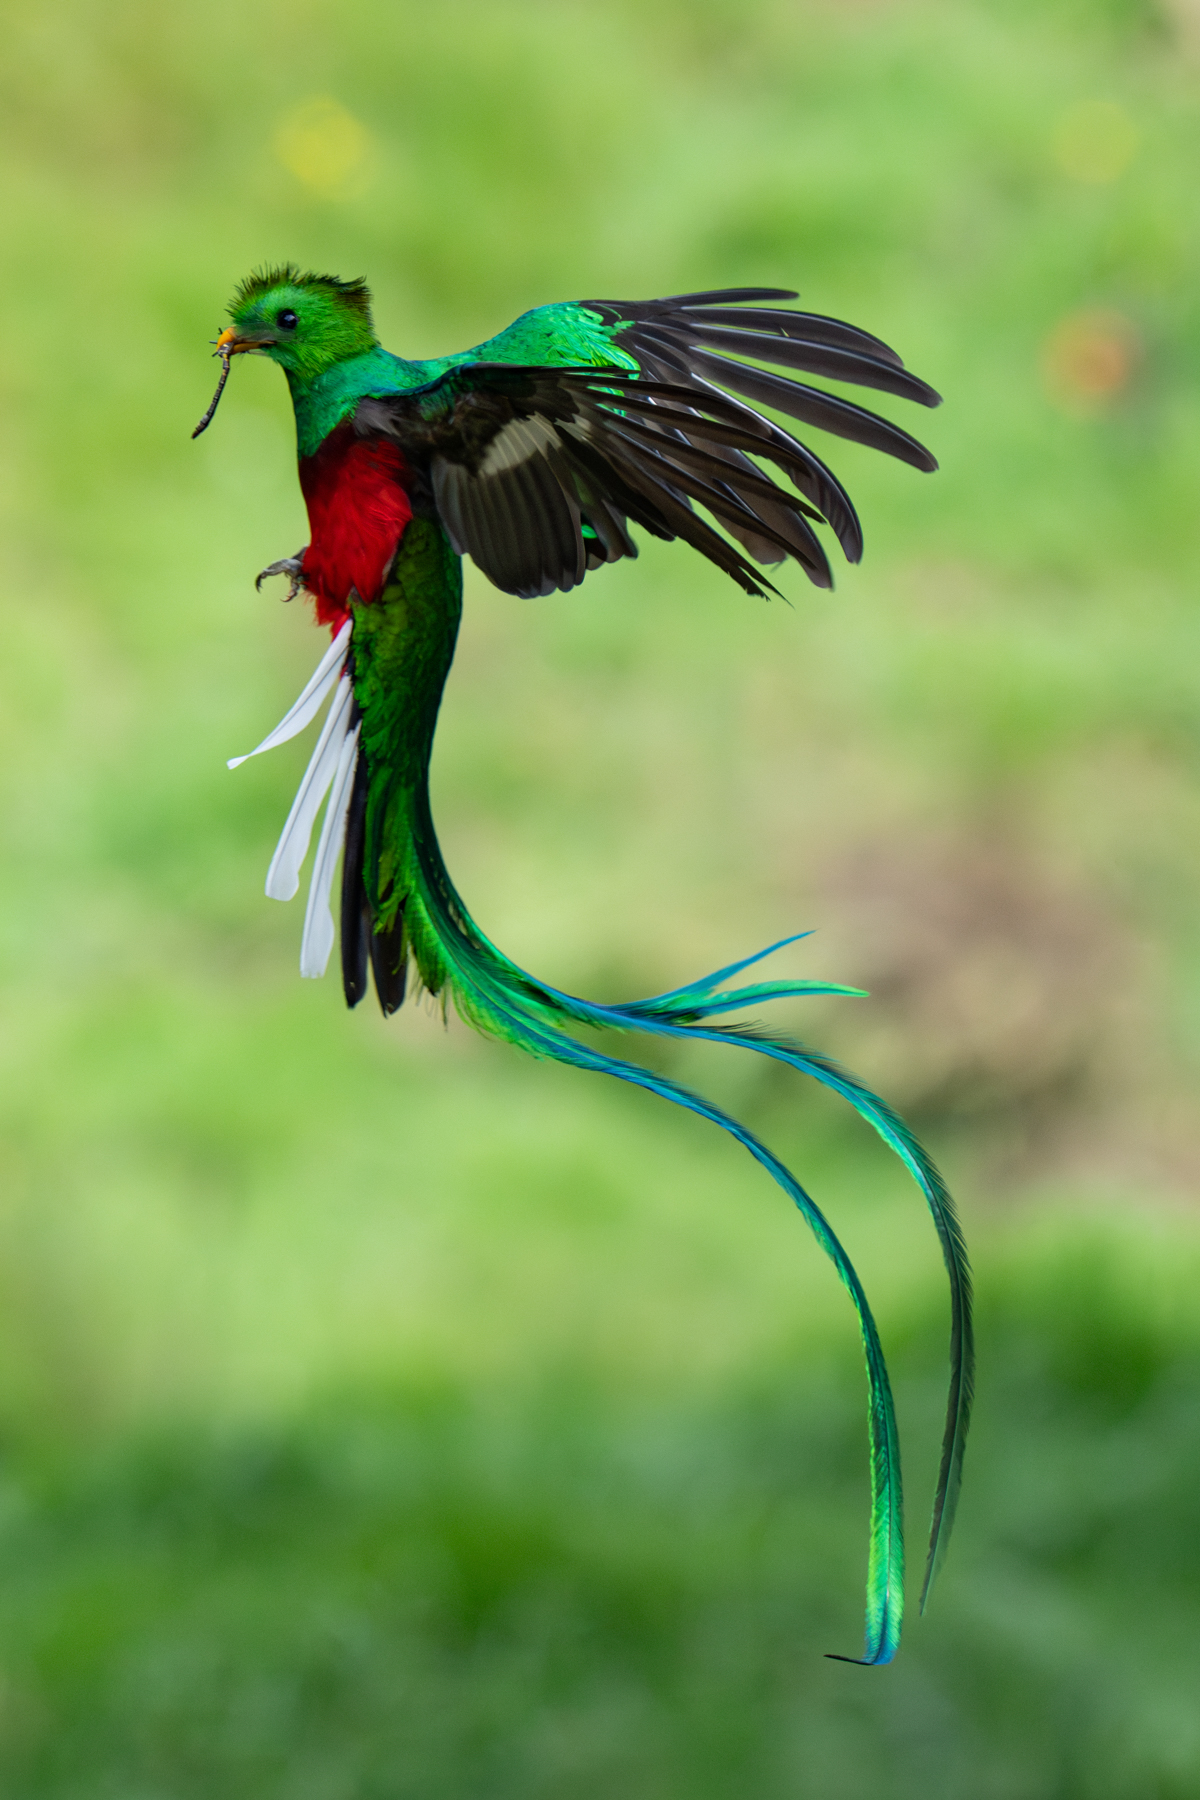 Resplendent Quetzals. When they fly they are so beautiful they almost don't look real (image by Inger Vandyke)